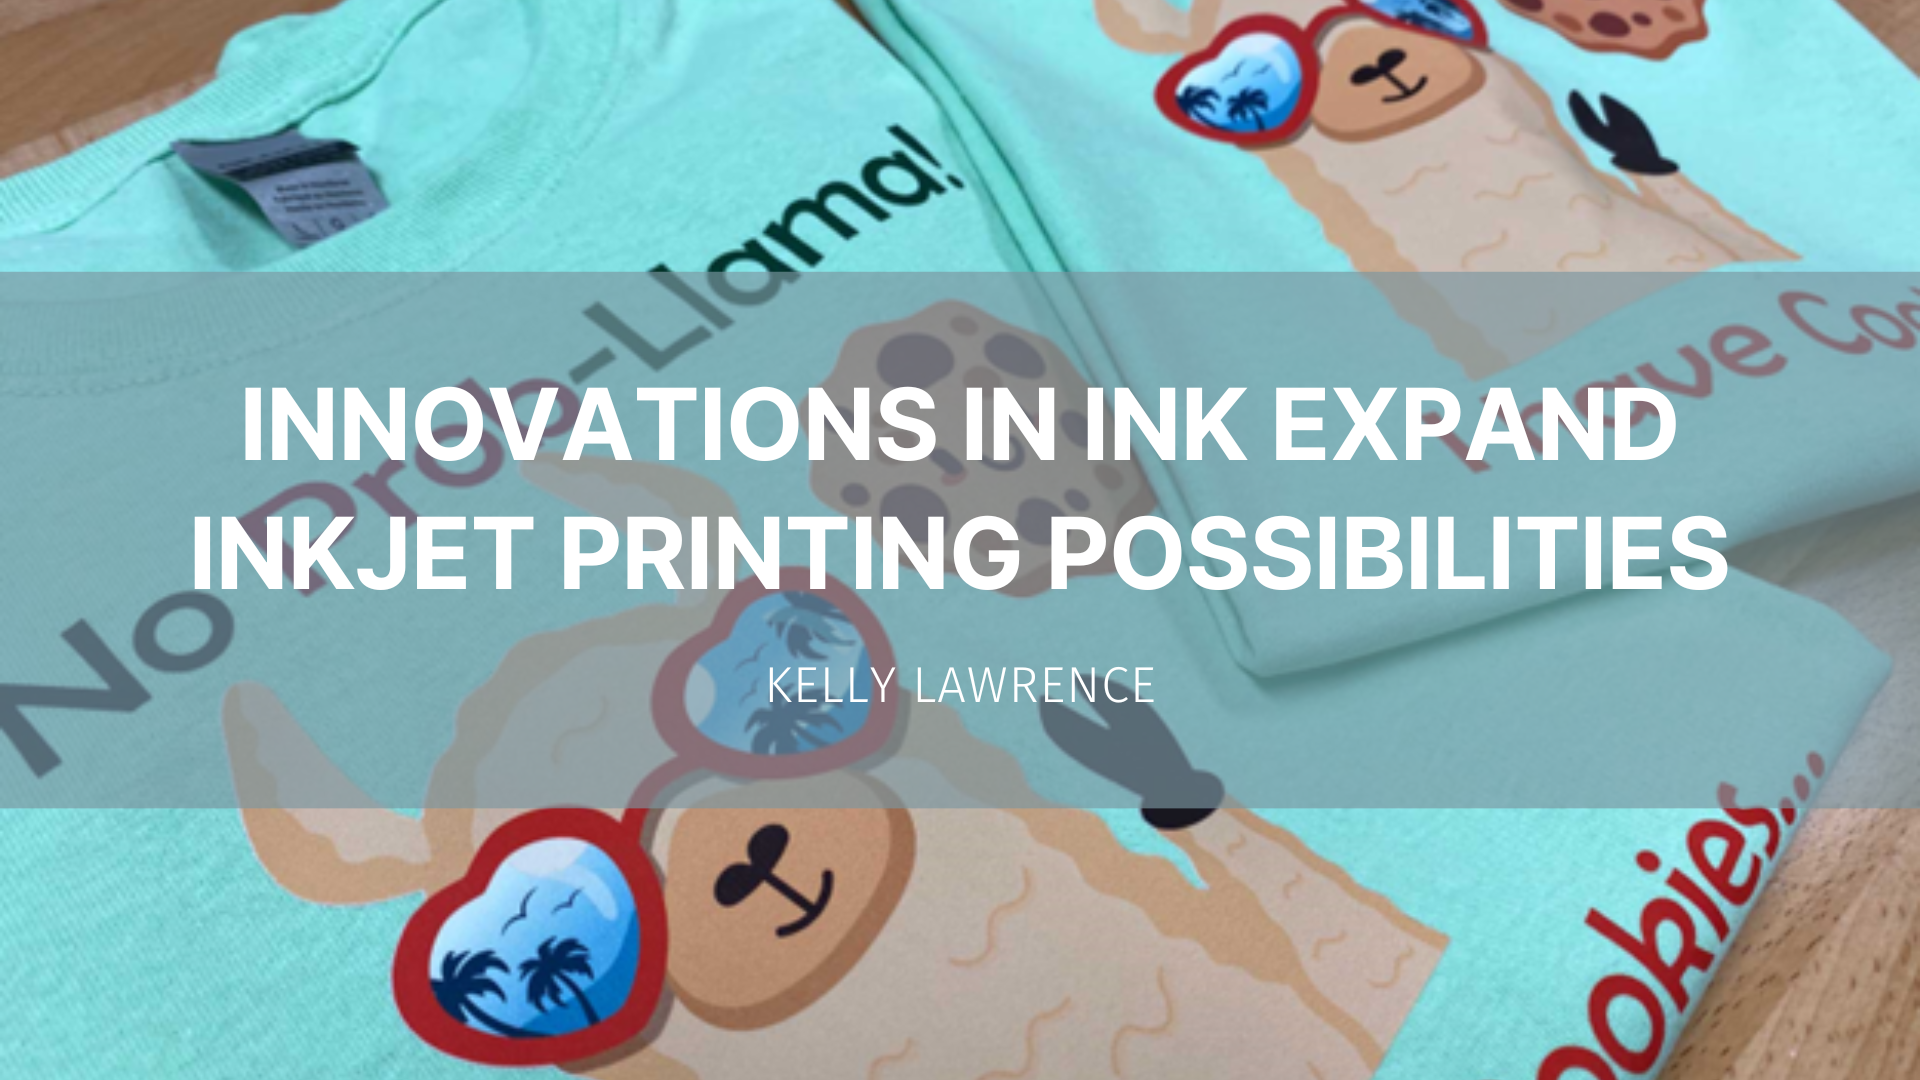 Featured image for “Innovations in Ink Expand Inkjet Printing Possibilities”